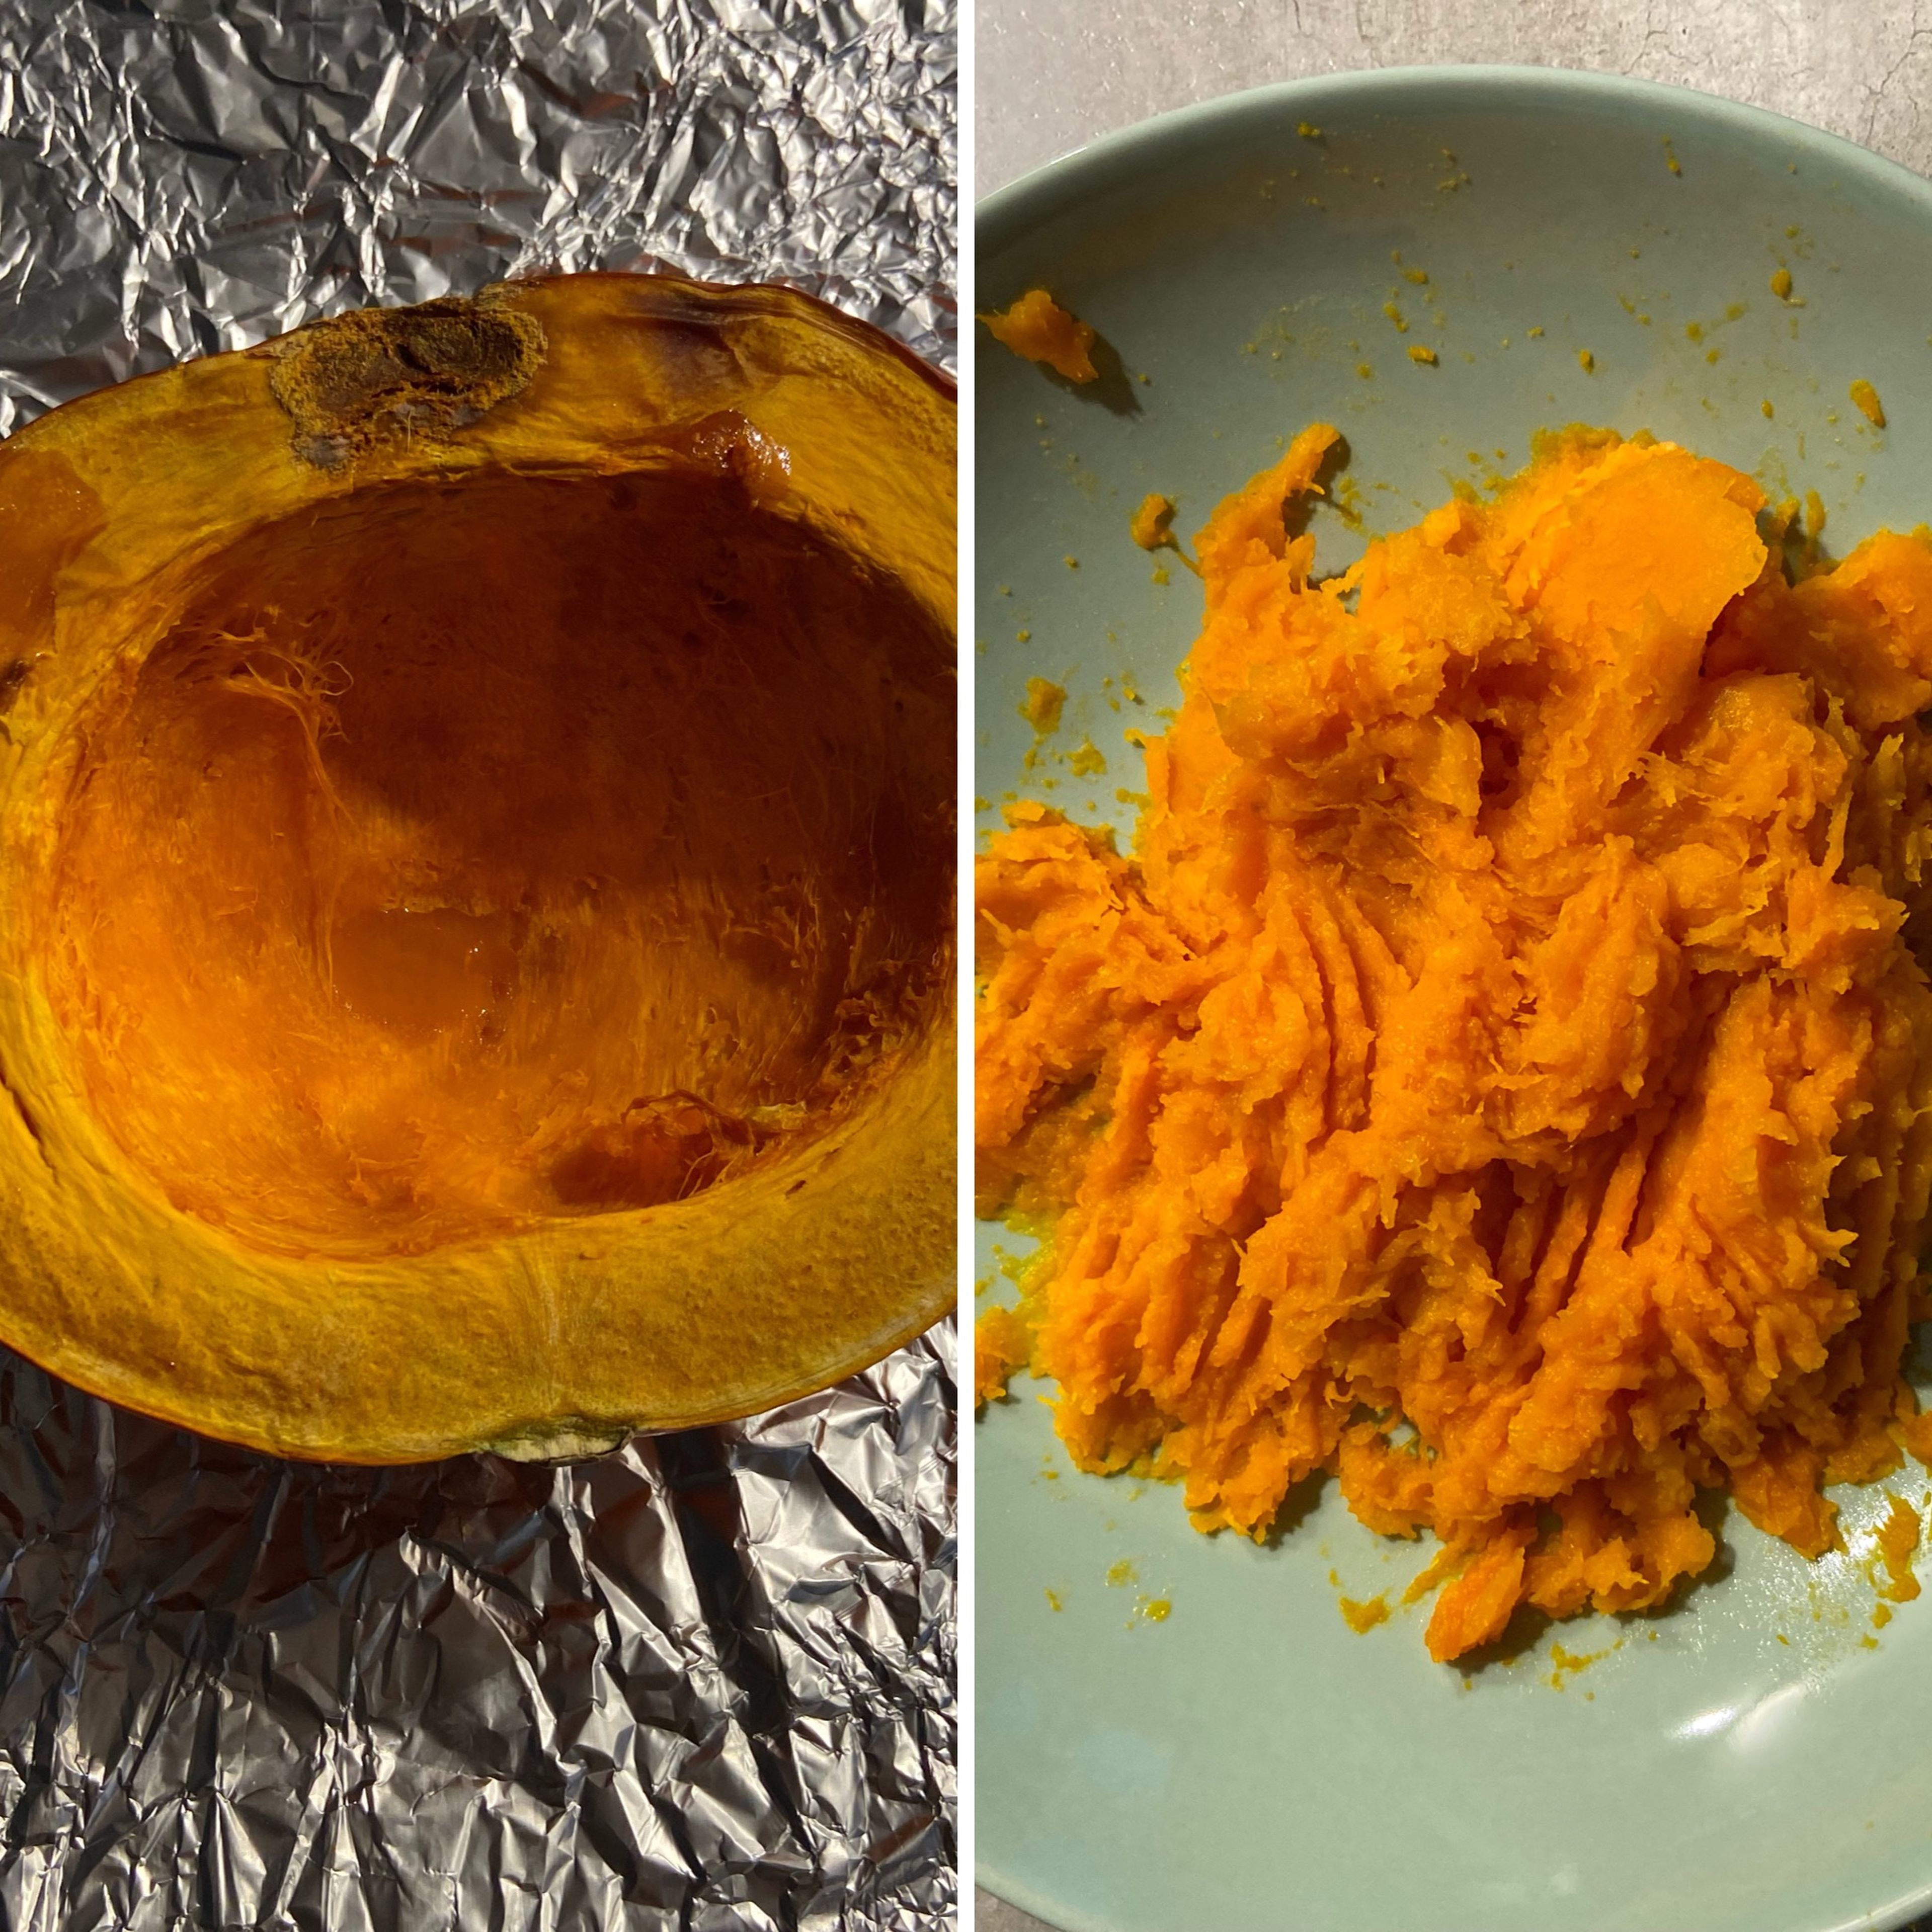 Bake the half pumpkin in the oven at 200 degrees for 20 minutes until soft. Let it cool for a few minutes and you’ll be able to easily peel it with a spoon. Then smash the pulp with a mixer or simply a fork.